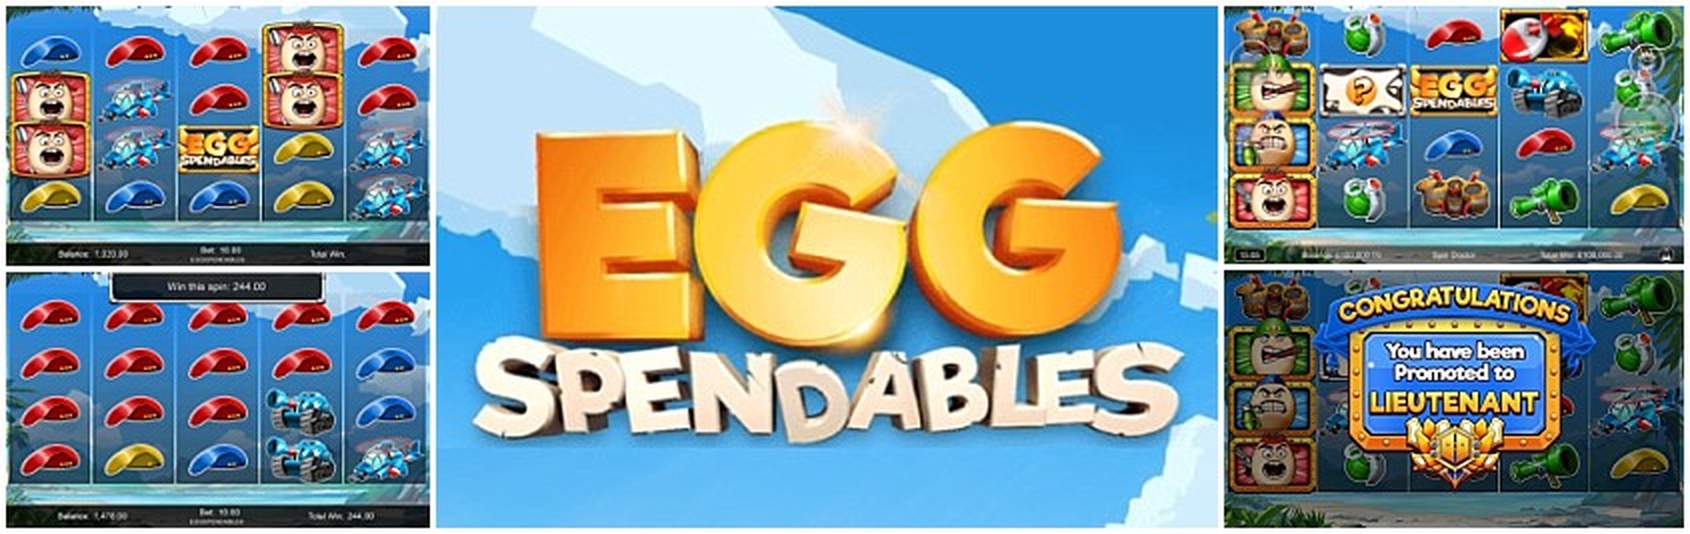 The Eggspendables Online Slot Demo Game by Incredible Technologies